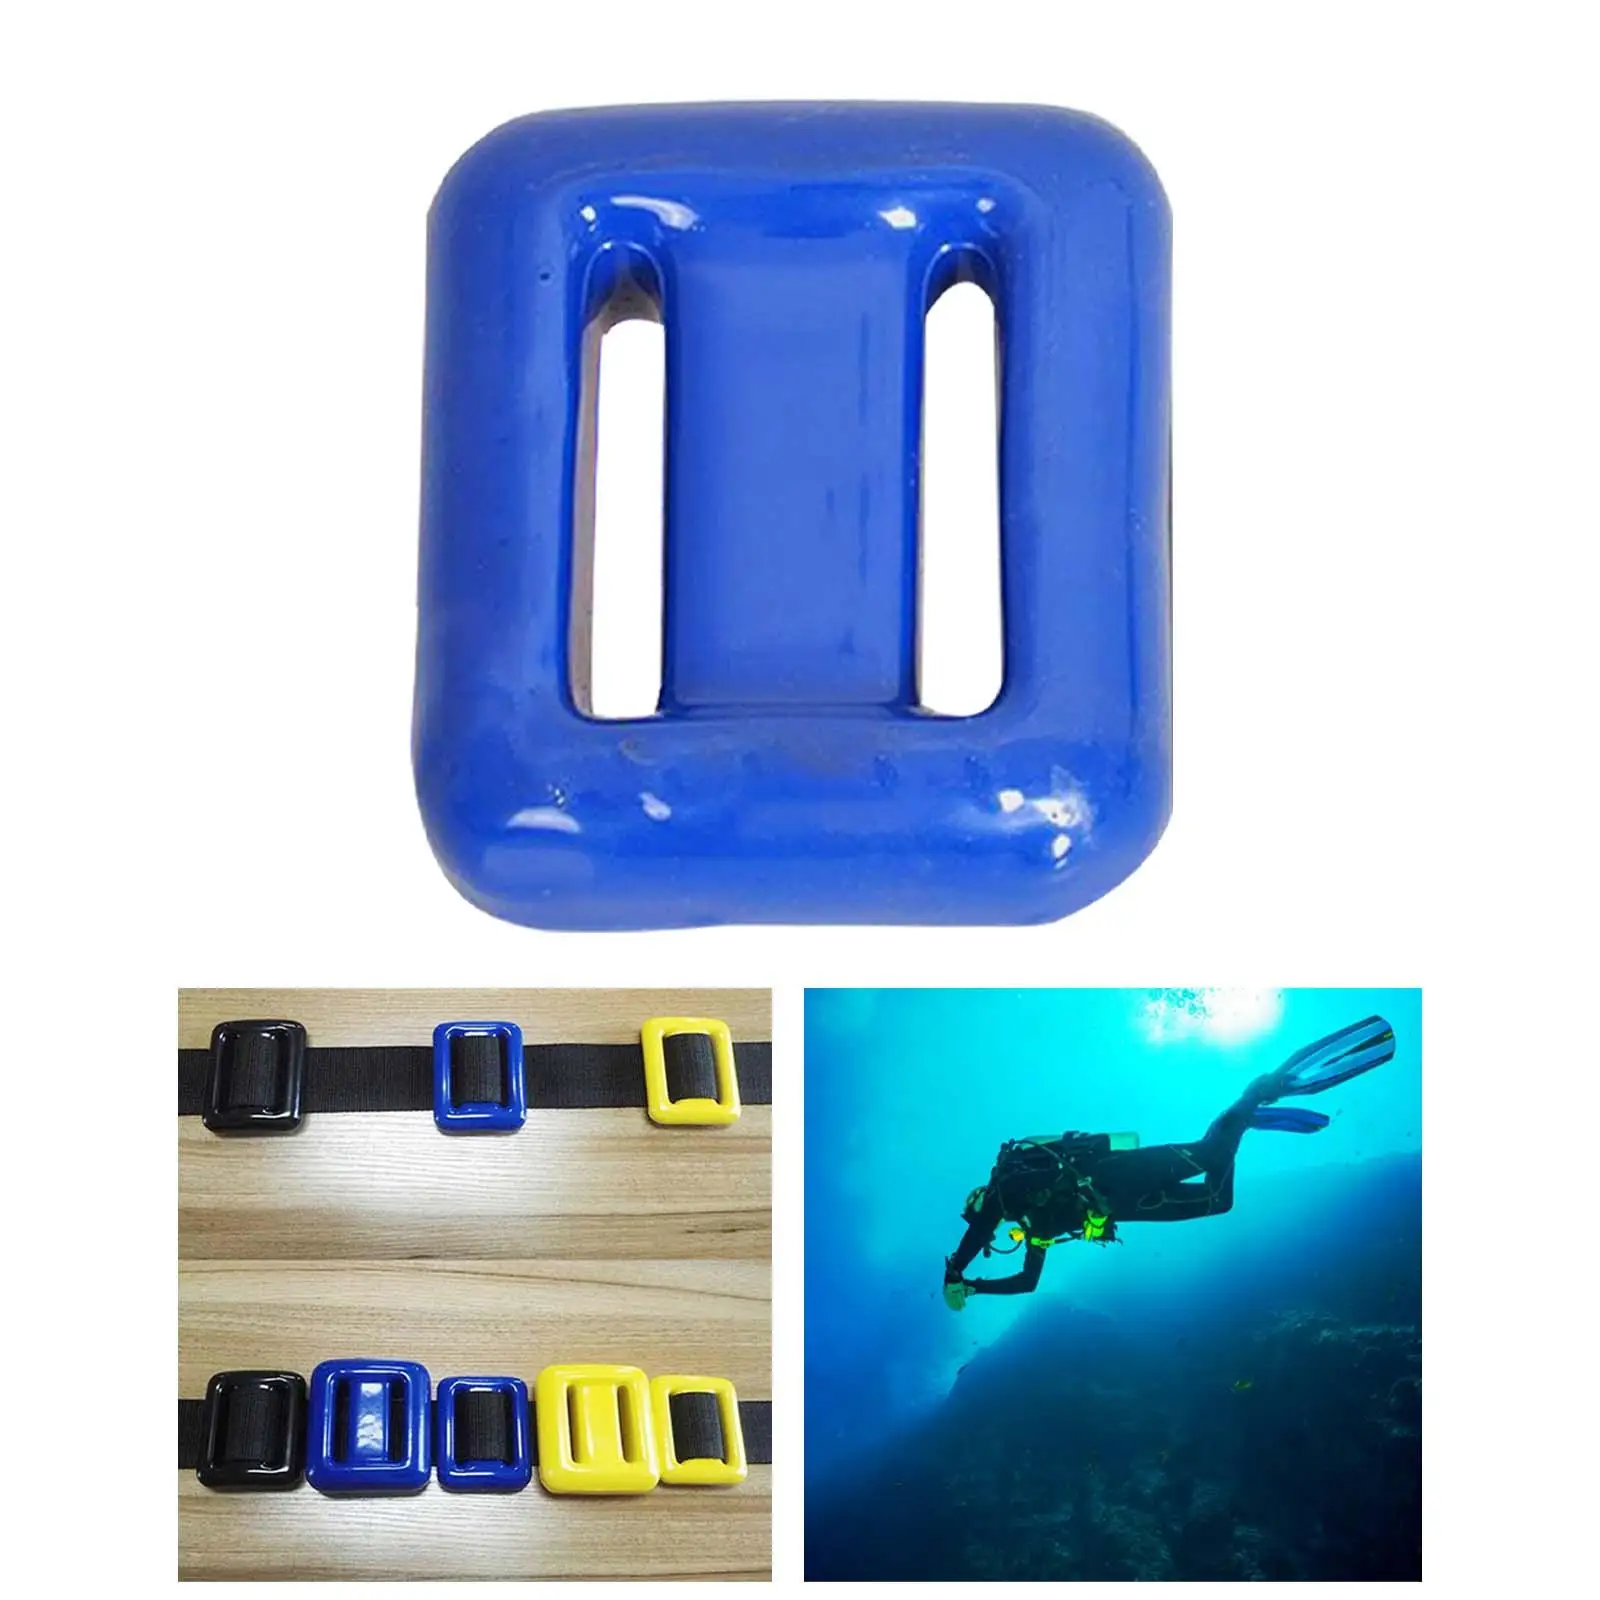 0.5/1.5kg Diving Weight Backplate Diving Scuba Weight Waist Belt Tools Colorful Snorkeling Equipment for Free Dive Scuba Diving